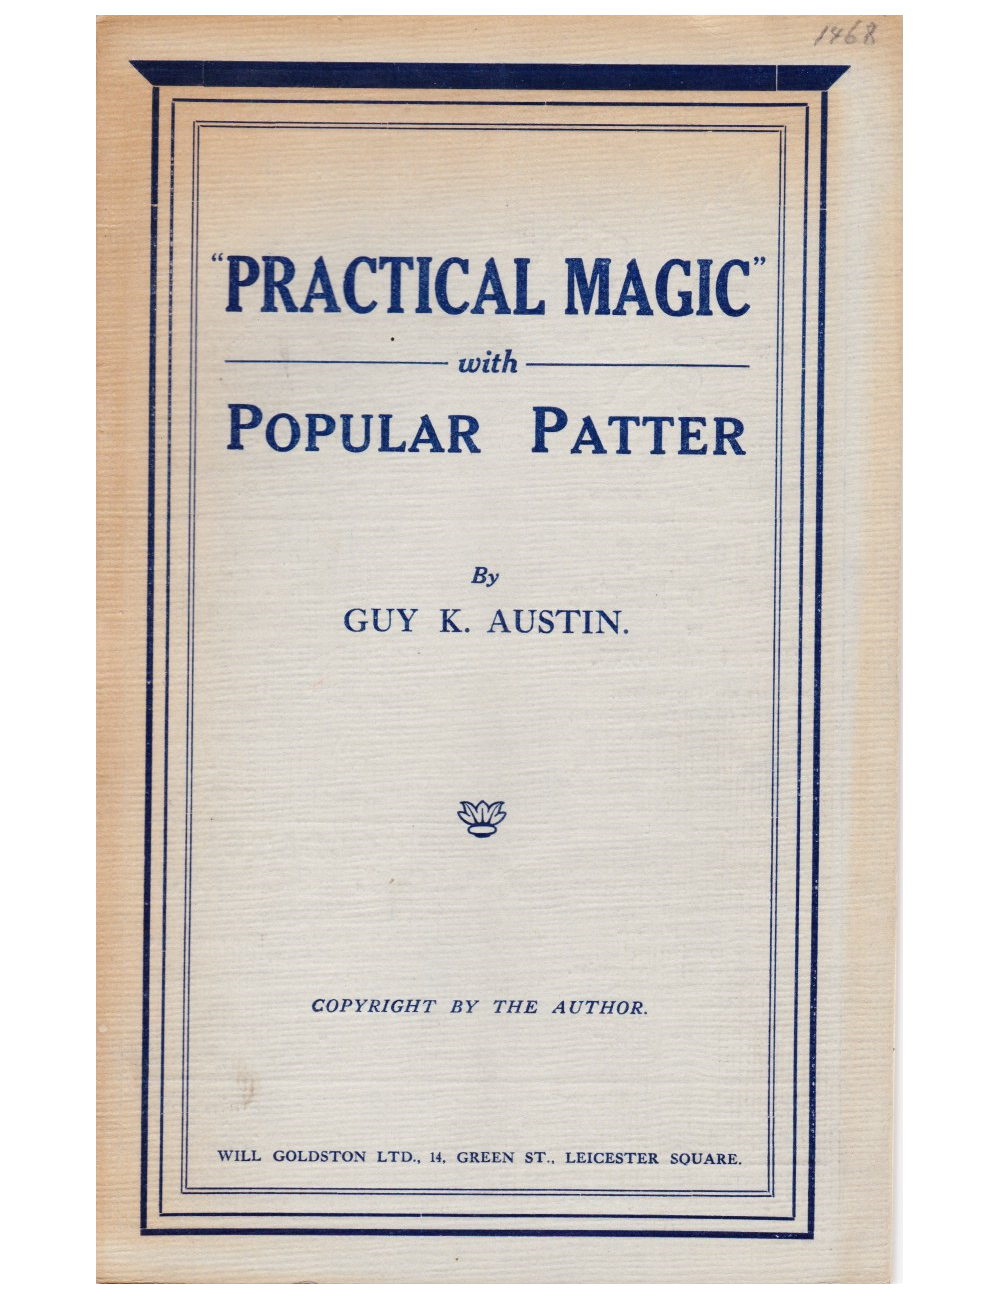 PRACTICAL MAGIC WITH POPULAR PATTER by GUY K. AUSTIN